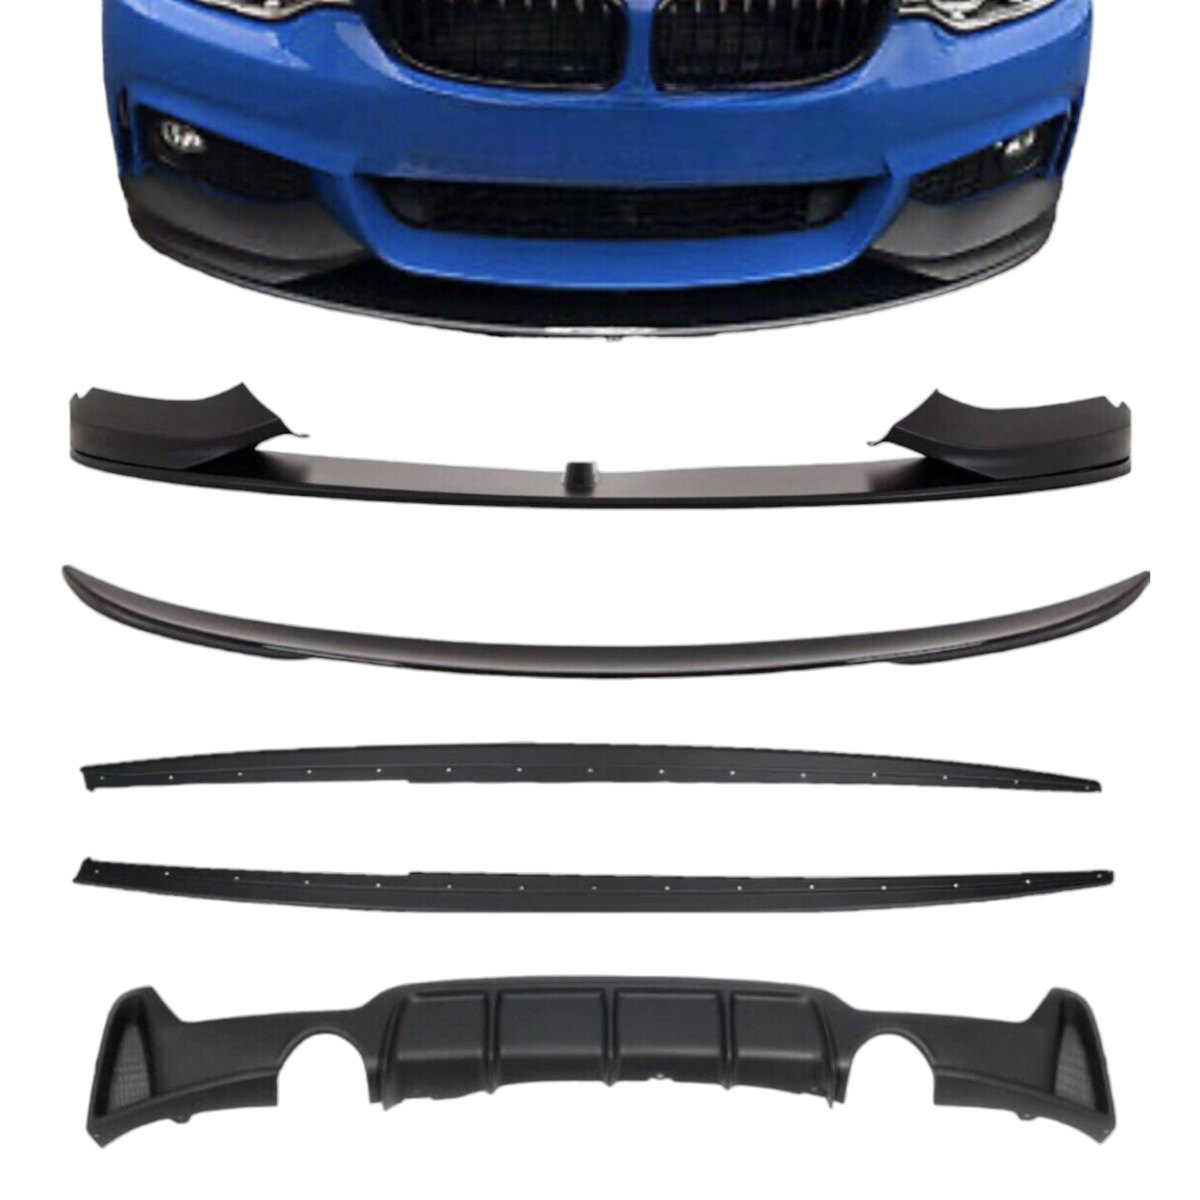 Full Body Kit - Fits BMW F32 4 Series Coupe - Dual Exit - Matte Black